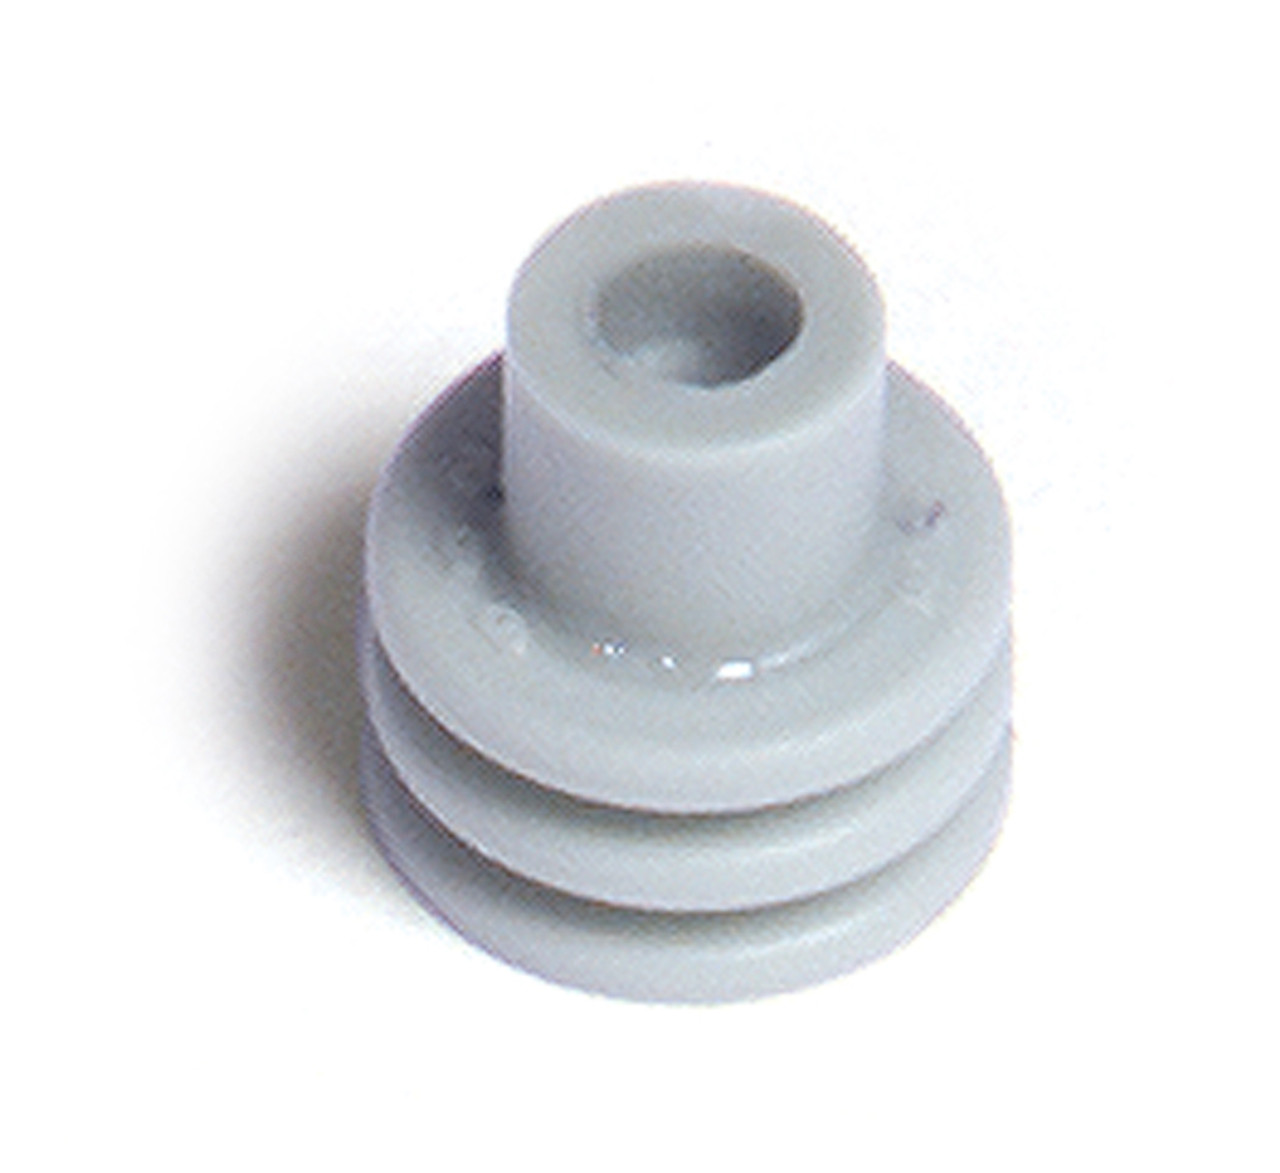 16 - 14 AWG Weather Pack Cable Seals @ 1000 Pack - Gray  88-2082